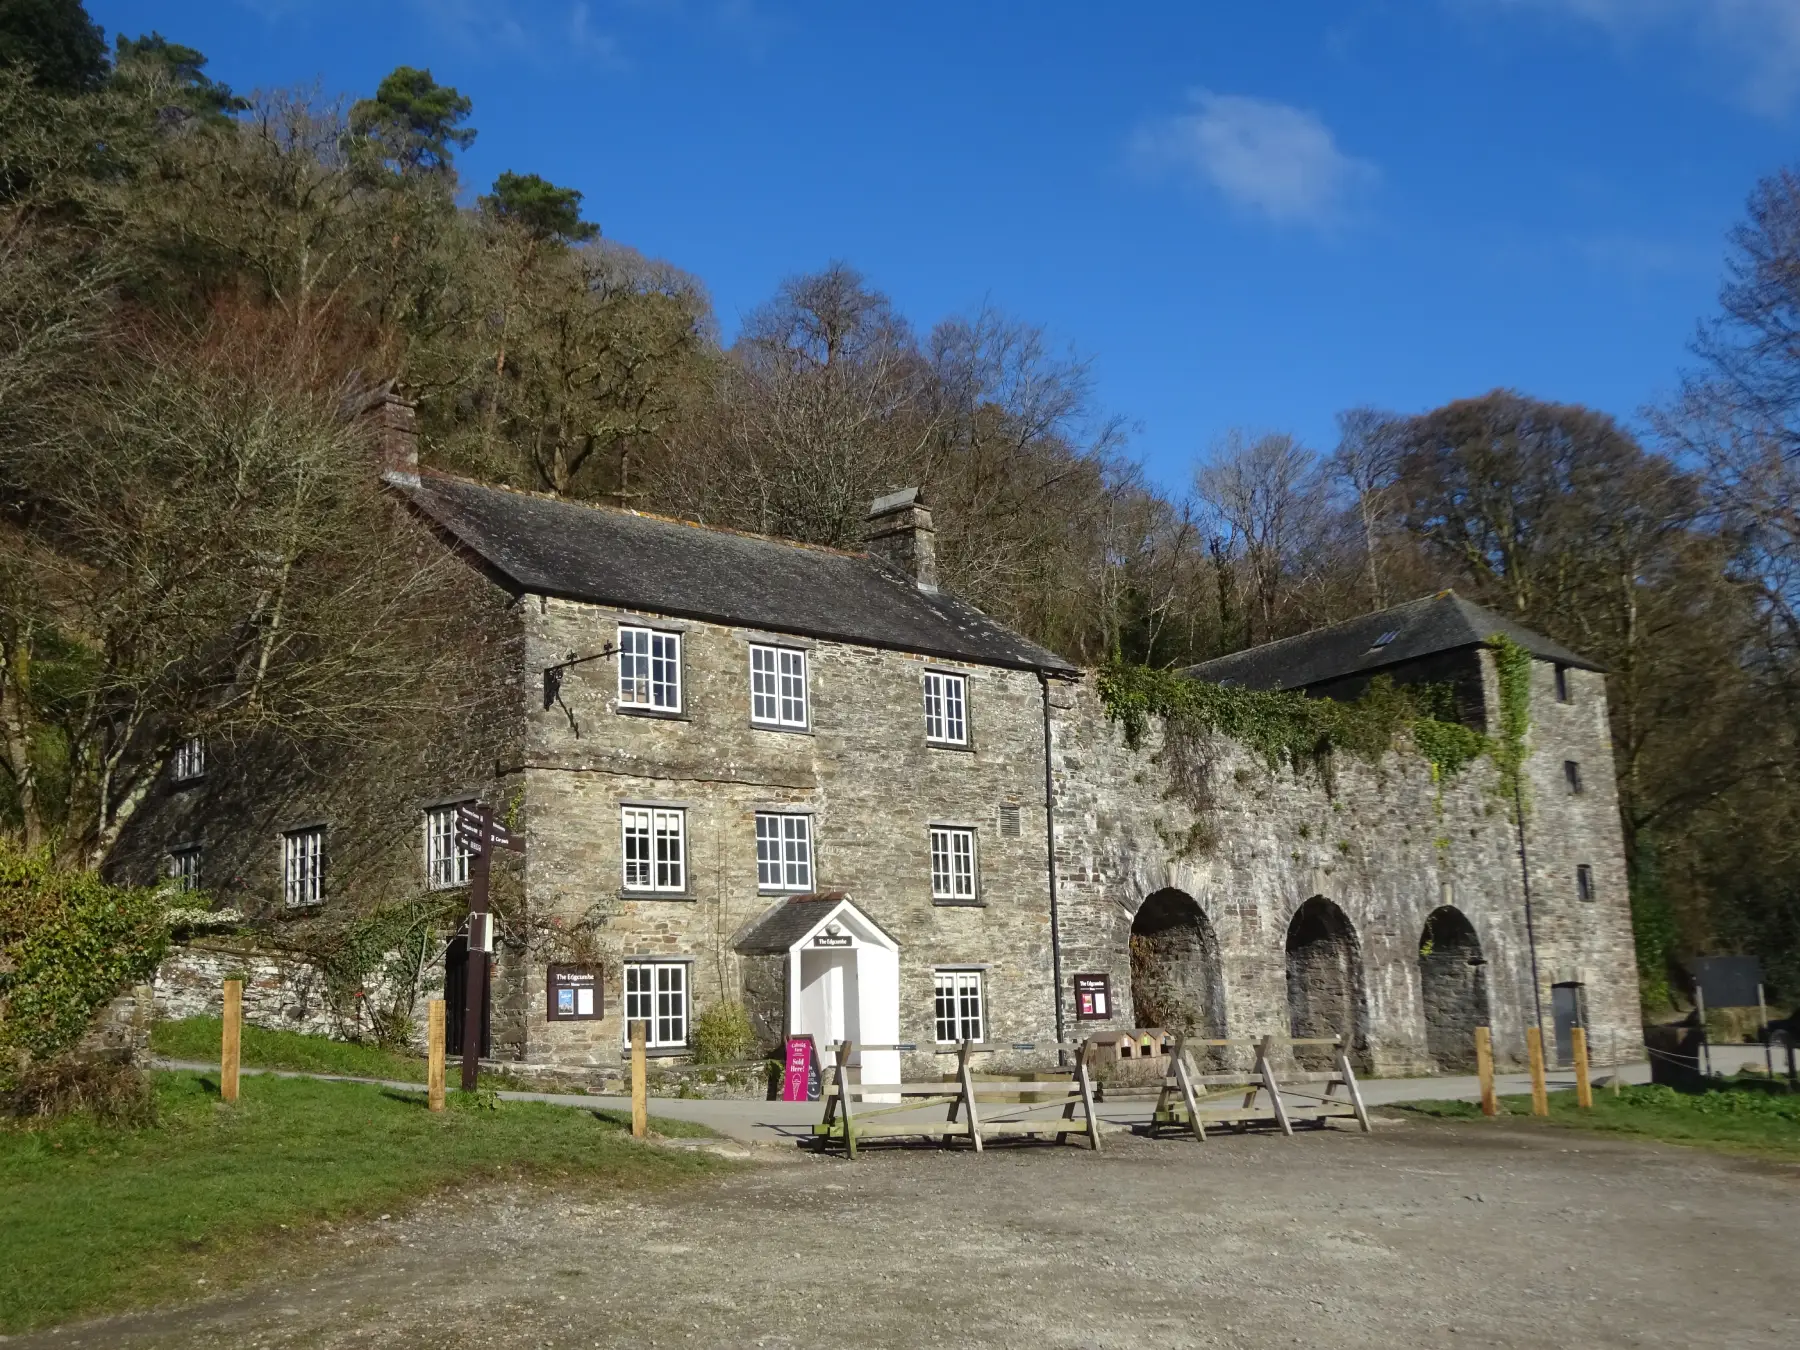 Cotehele Quay: ‘The Edgcumbe’, dating from the late 18th/early 19th centuries, with attached limekilns and warehouse